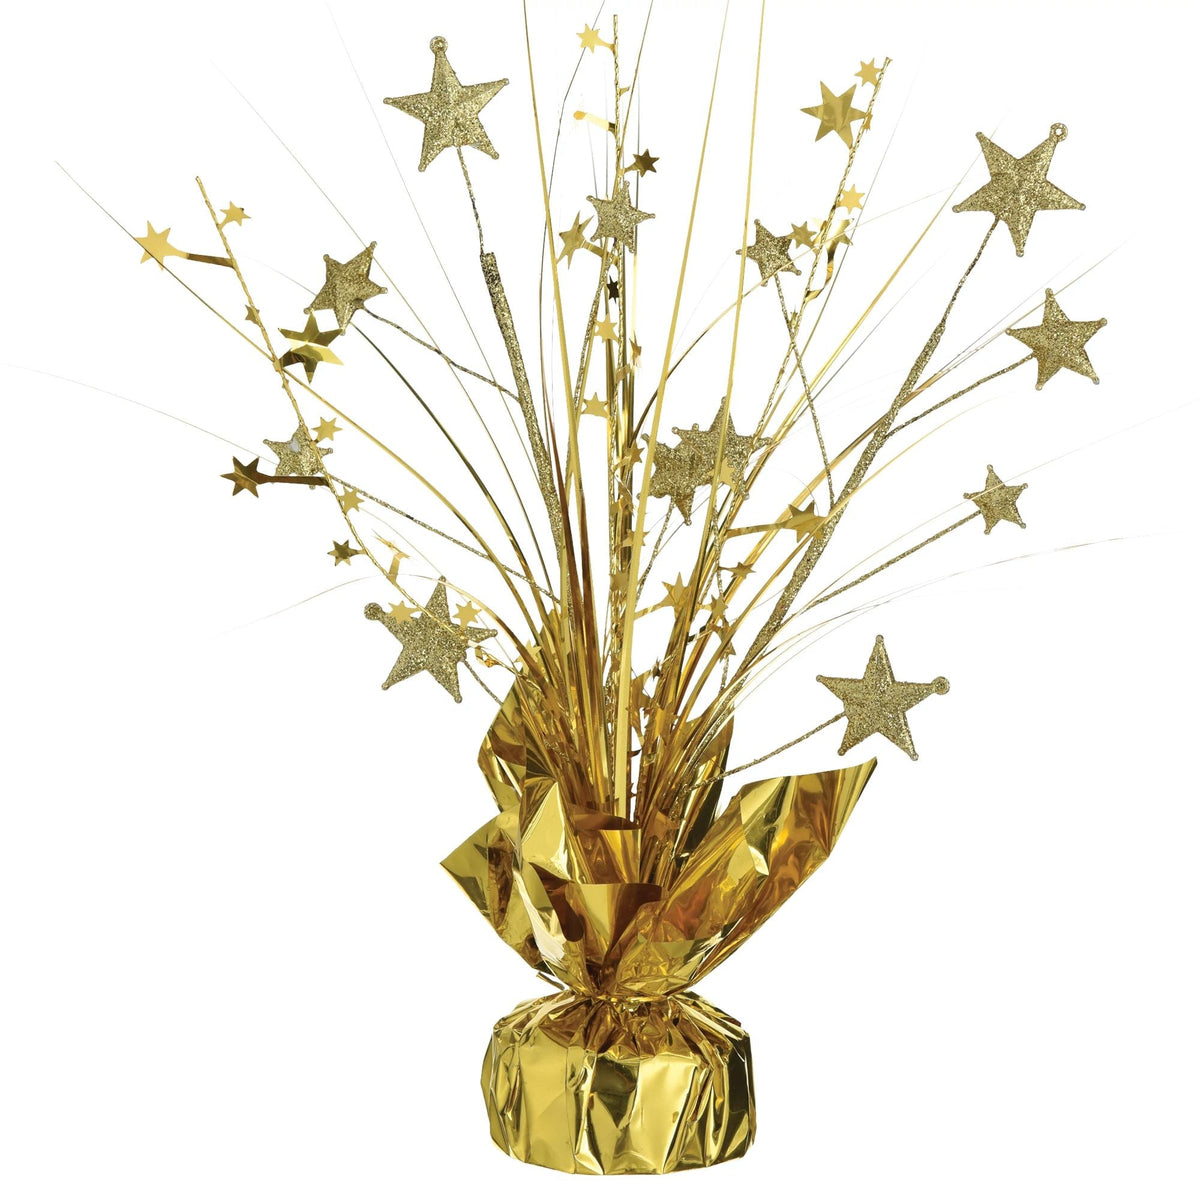 AMSCAN CA Decorations Spray Centerpiece with Stars, Gold, 12 Inches, 1 Count 192937416365